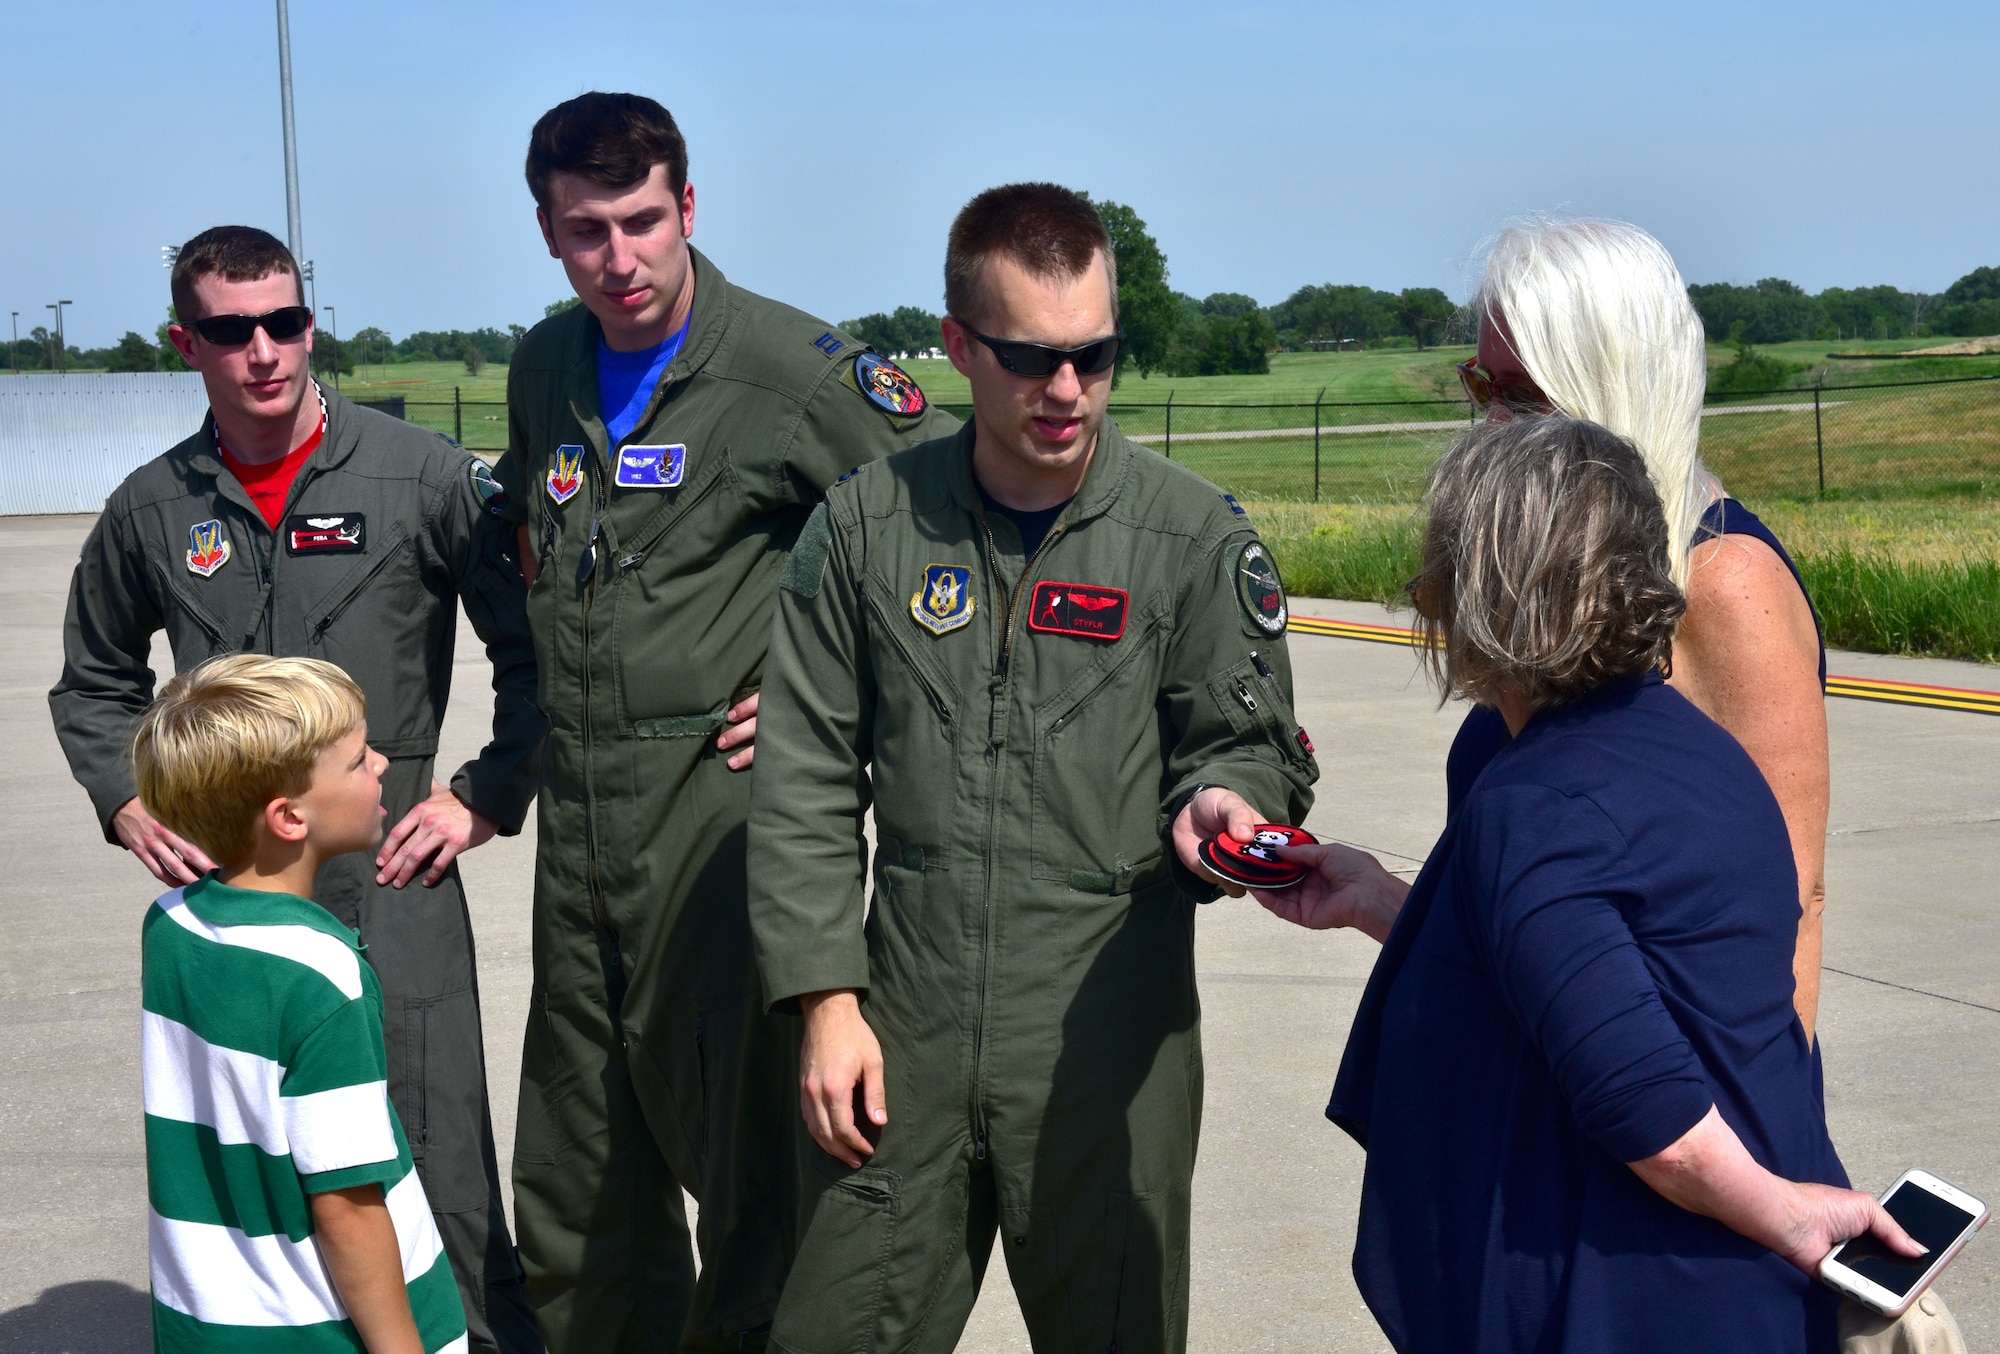 Capt. Christopher Shelly, 76th Fighter Squadron pilot, gives Lynn Evans, John Dean Armstrong’s niece, replica patches from the Flying Tigers unit that her uncle was part of, June 17, 2017, at McConnell Air Force Base, Kan. Evans and members of her family laid Armstrong to rest after searching for their missing family member’s remains for 13 years. (U.S. Air Force photo/Staff Sgt. Trevor Rhynes)